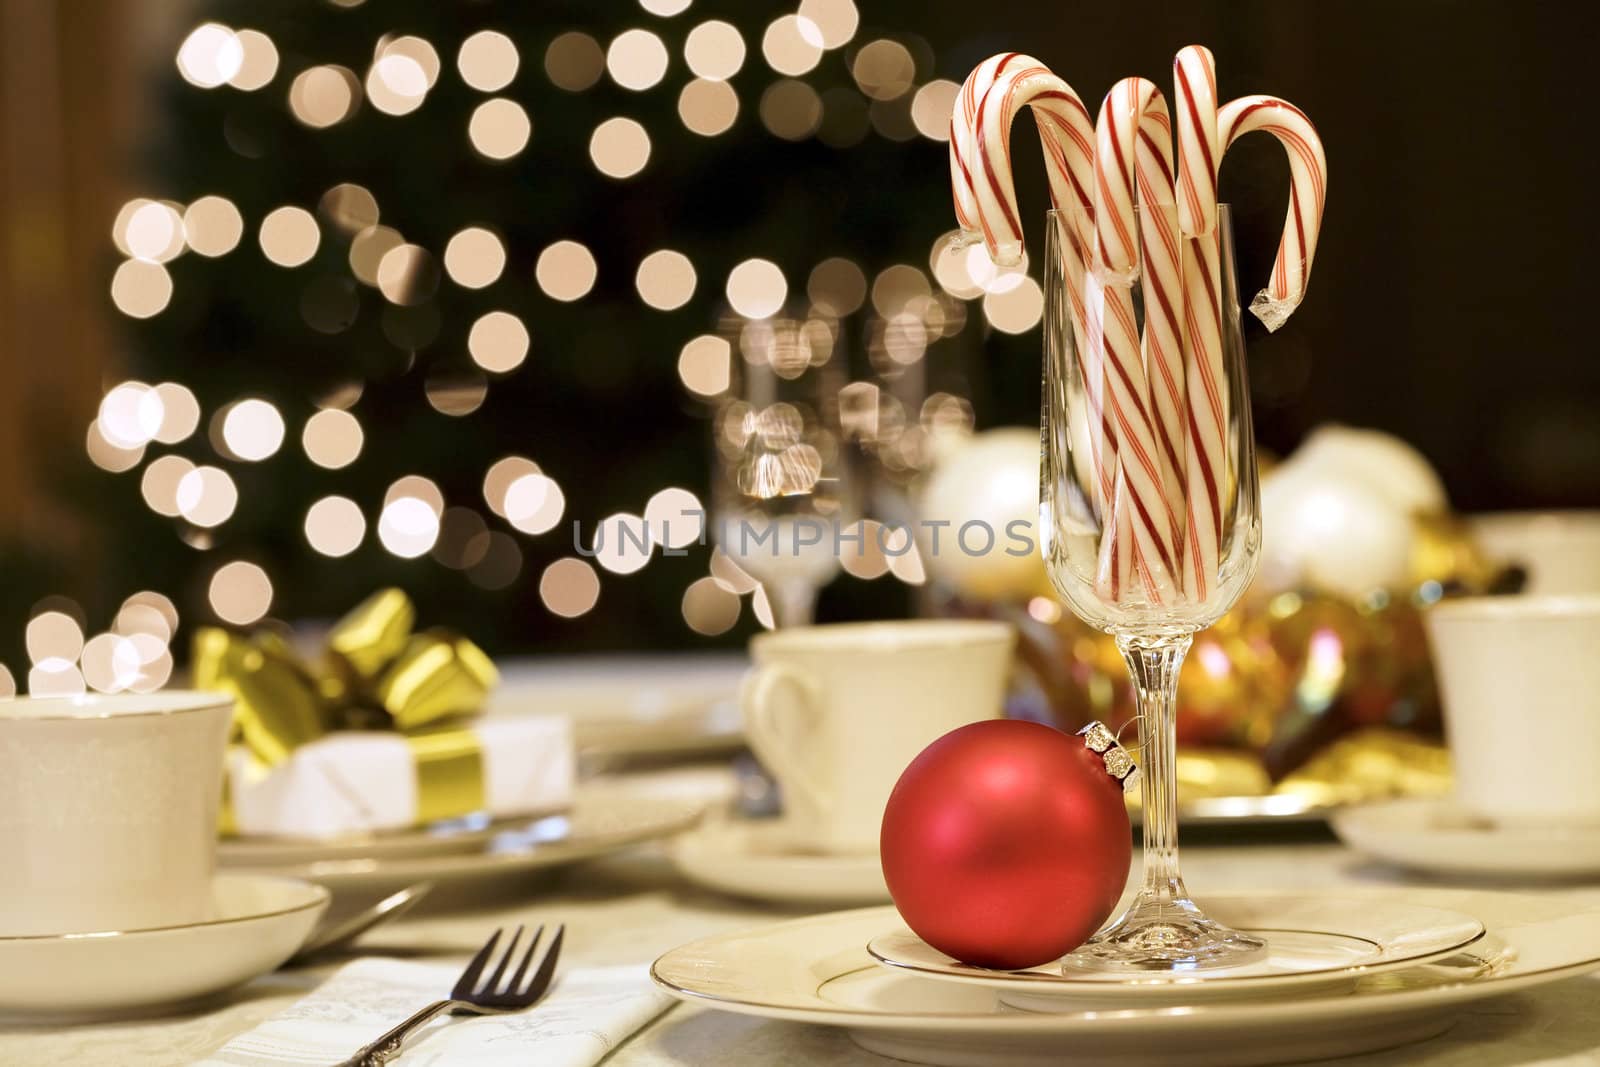 Candy canes and ornaments on table